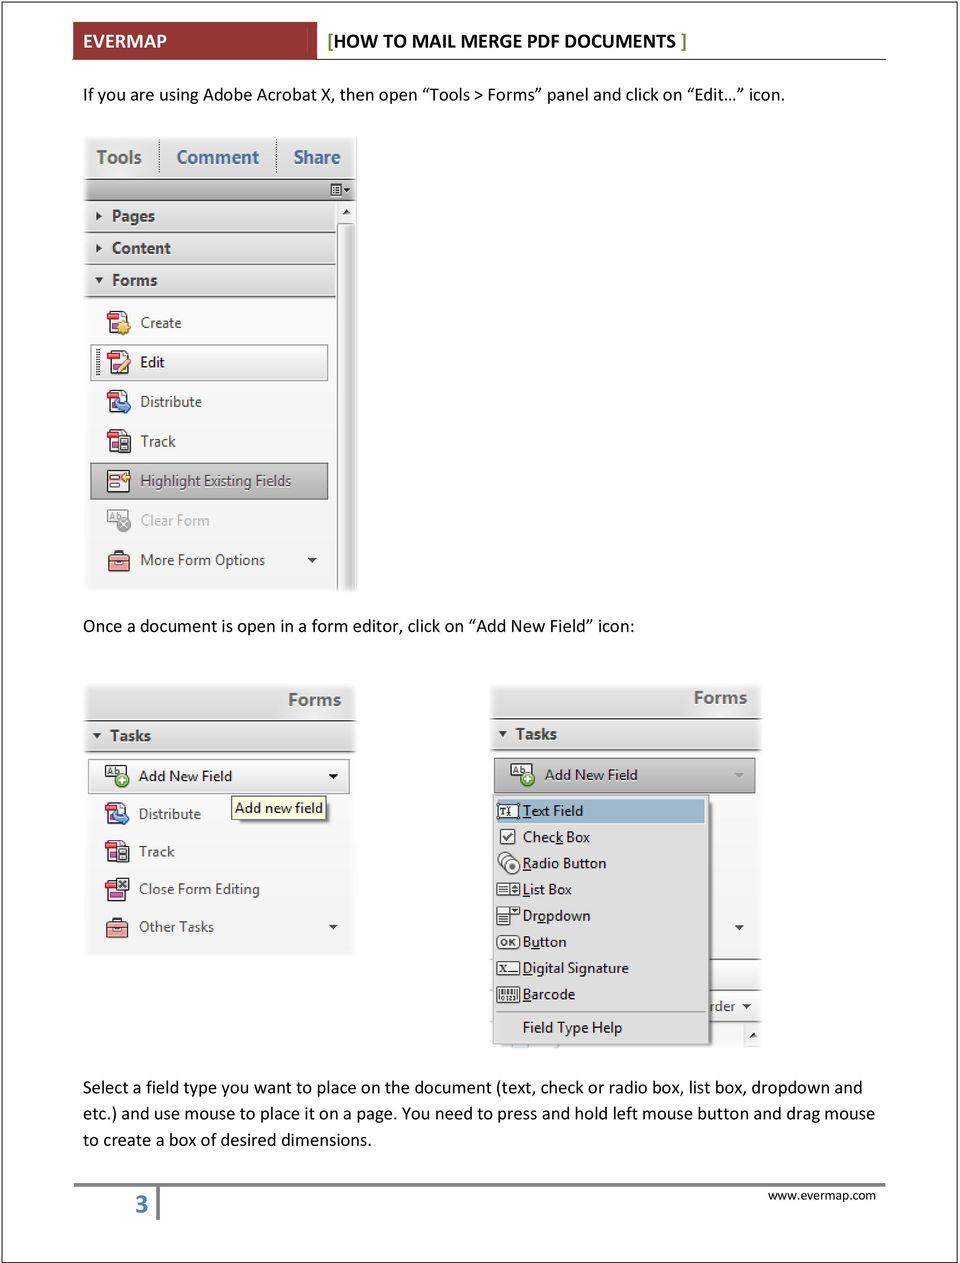 to place on the document (text, check or radio box, list box, dropdown and etc.